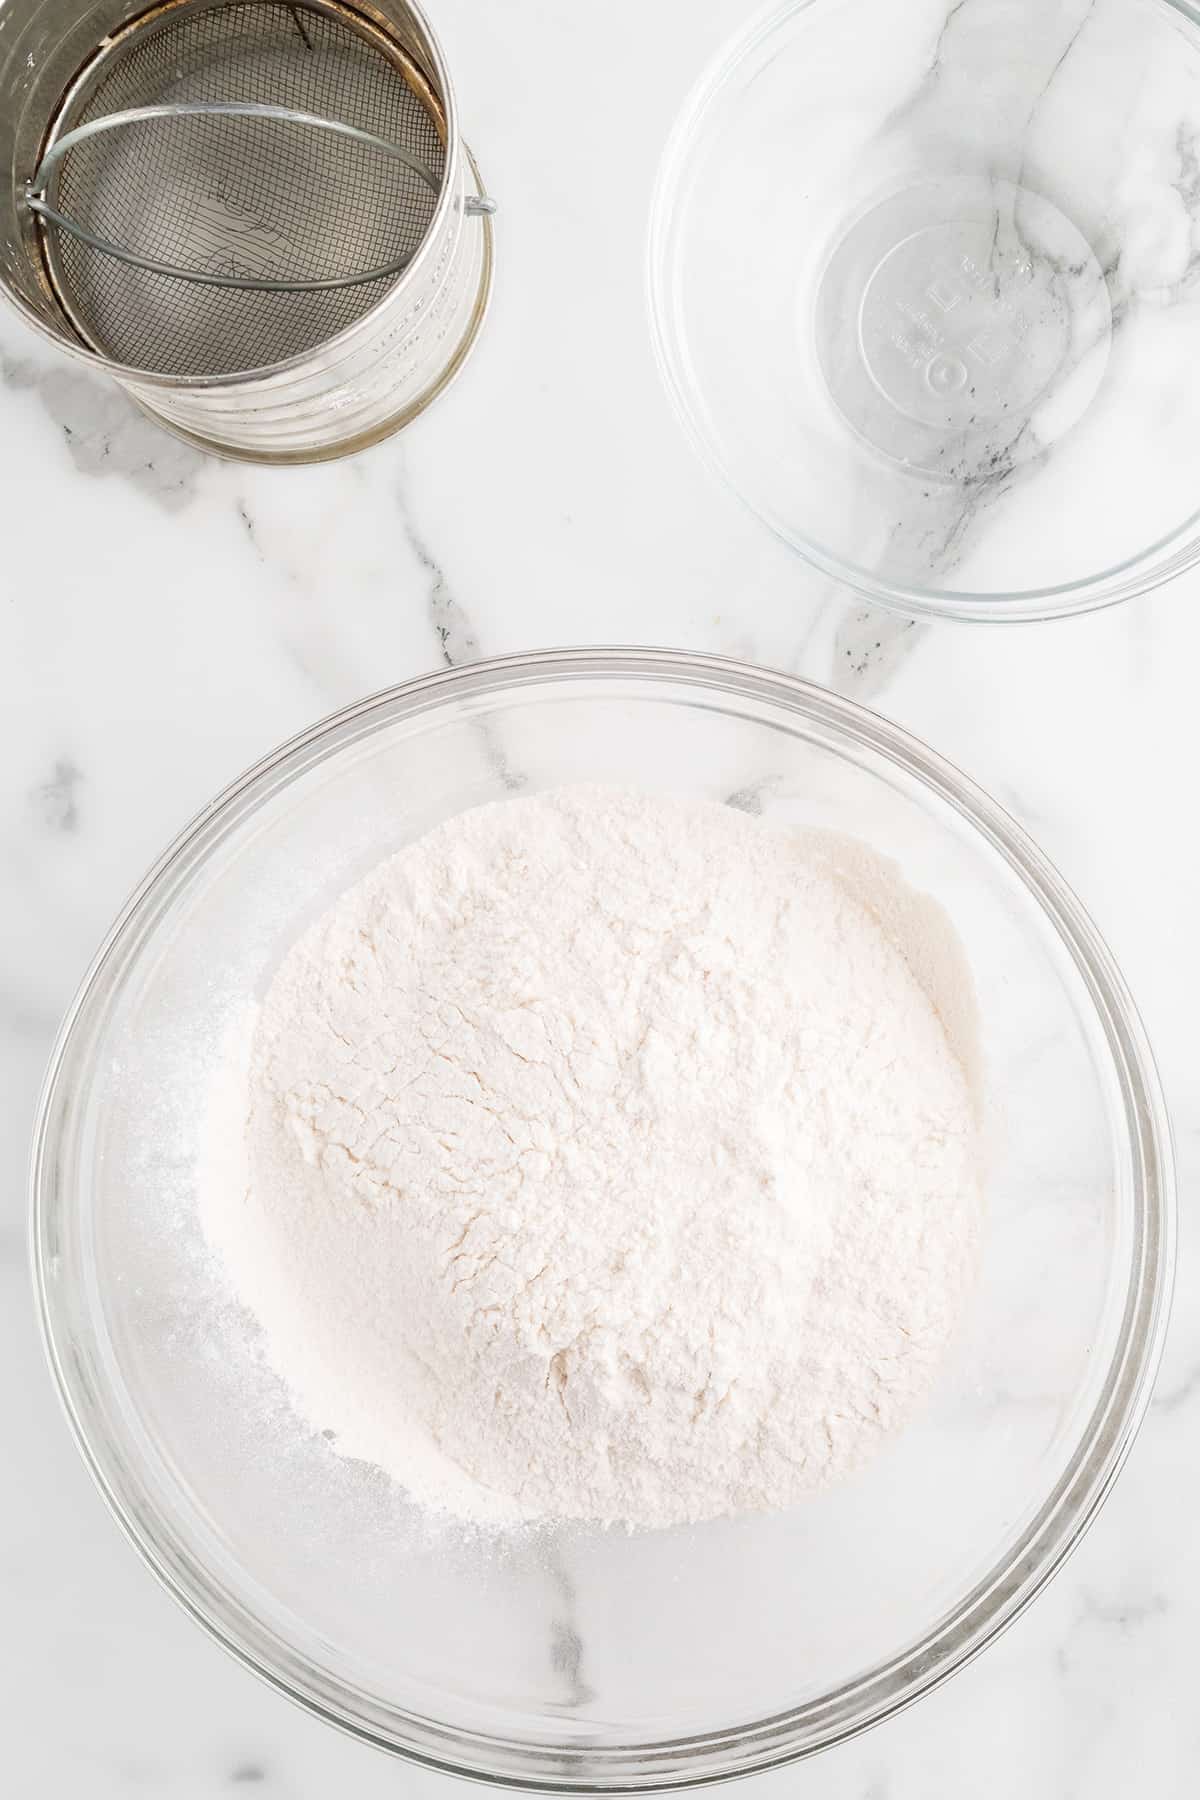 Sugar and flour sifted together in a bowl.